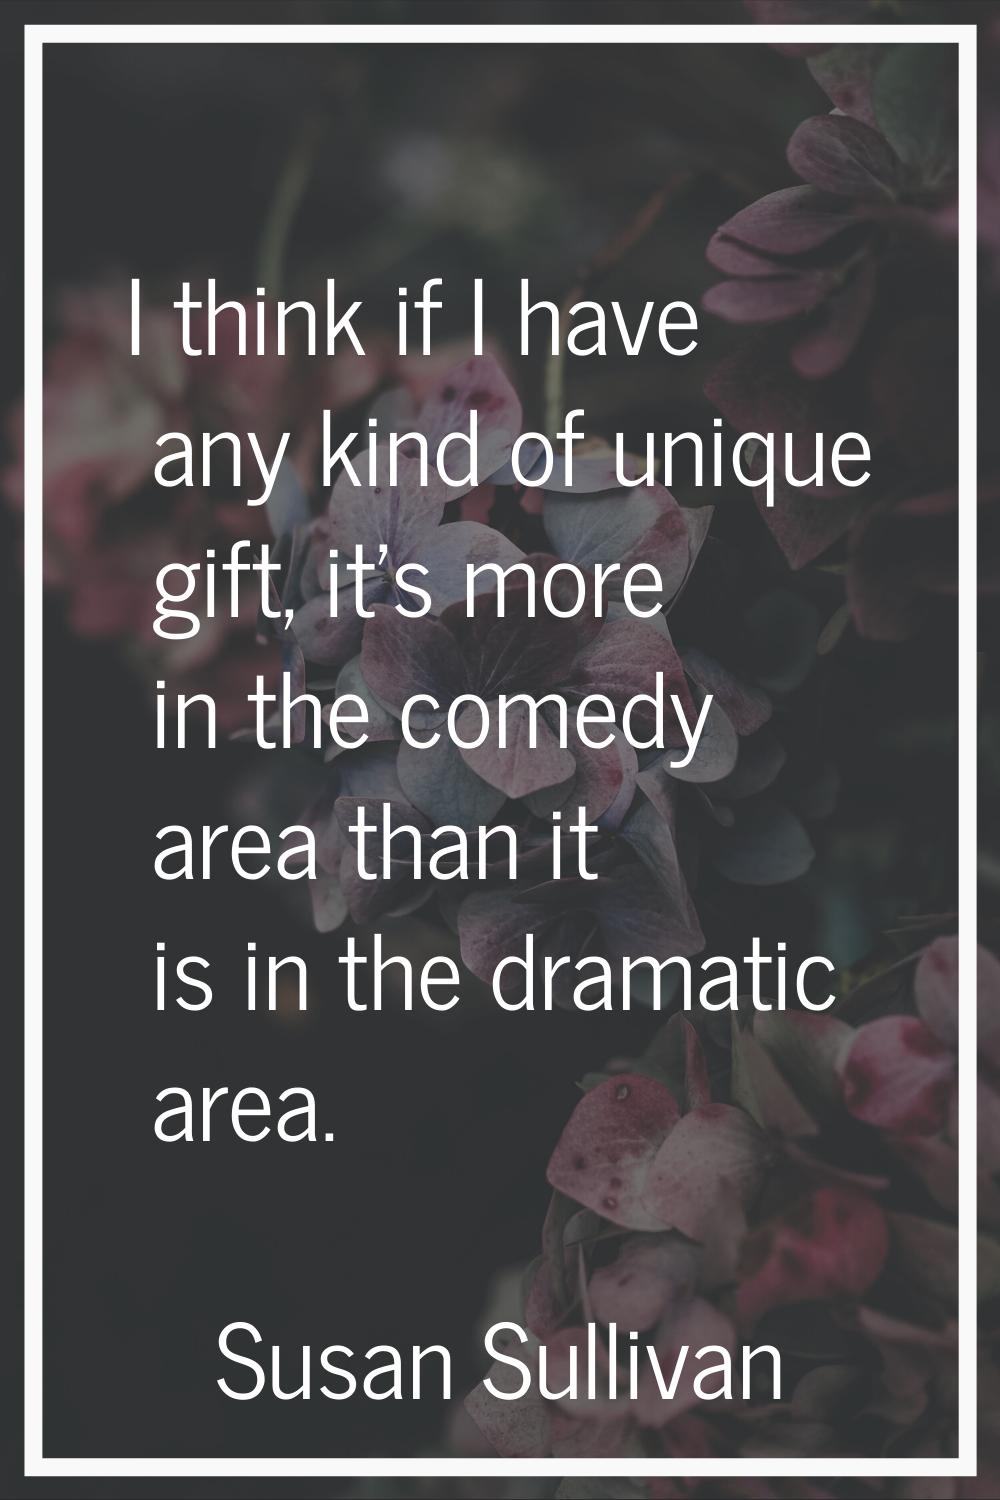 I think if I have any kind of unique gift, it's more in the comedy area than it is in the dramatic 